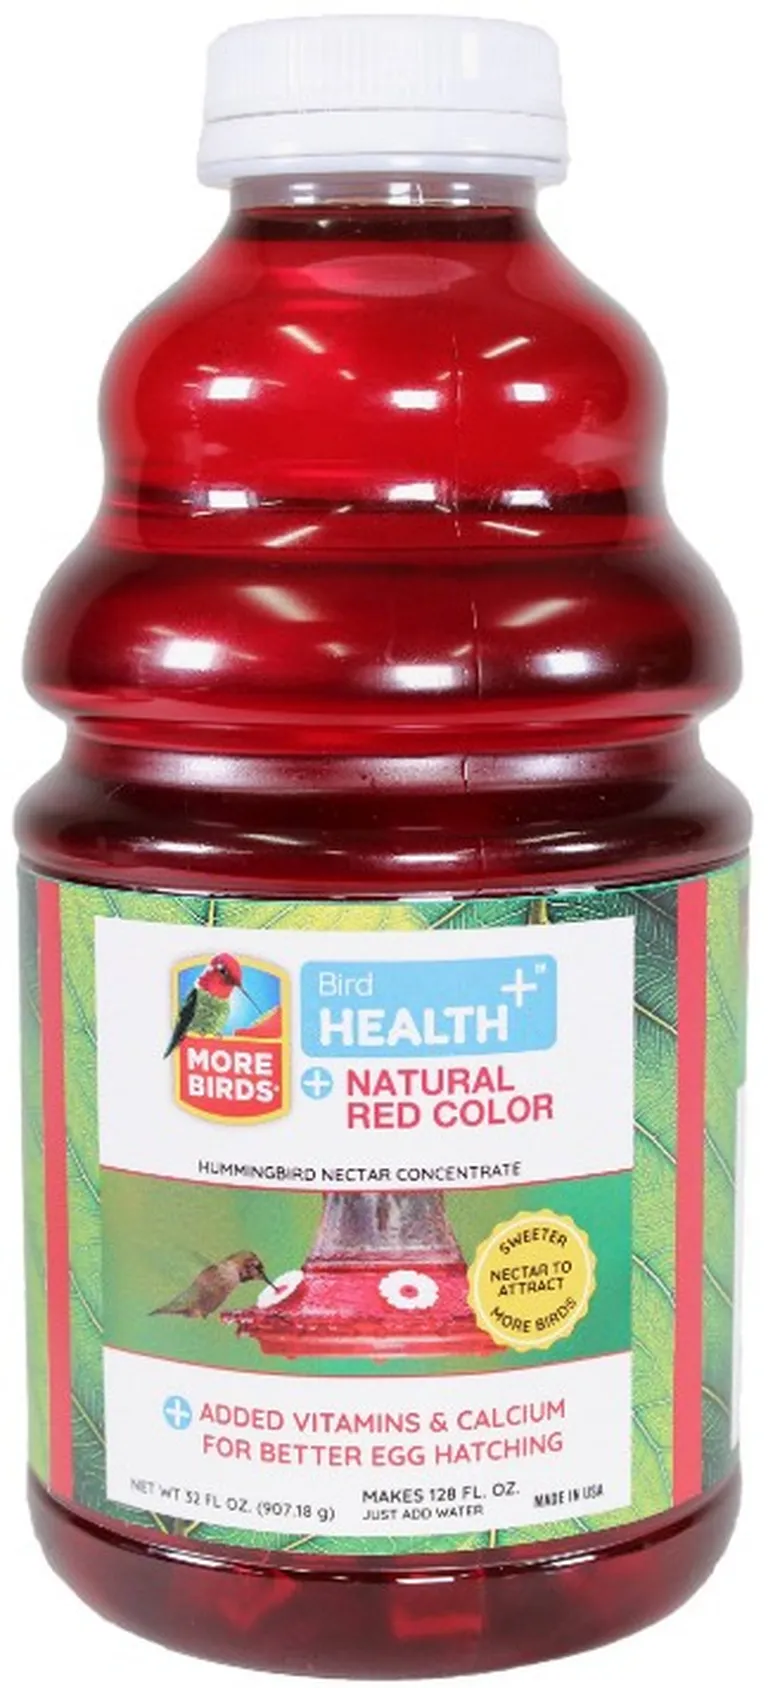 More Birds Health Plus Natural Red Hummingbird Nectar Concentrate Photo 1